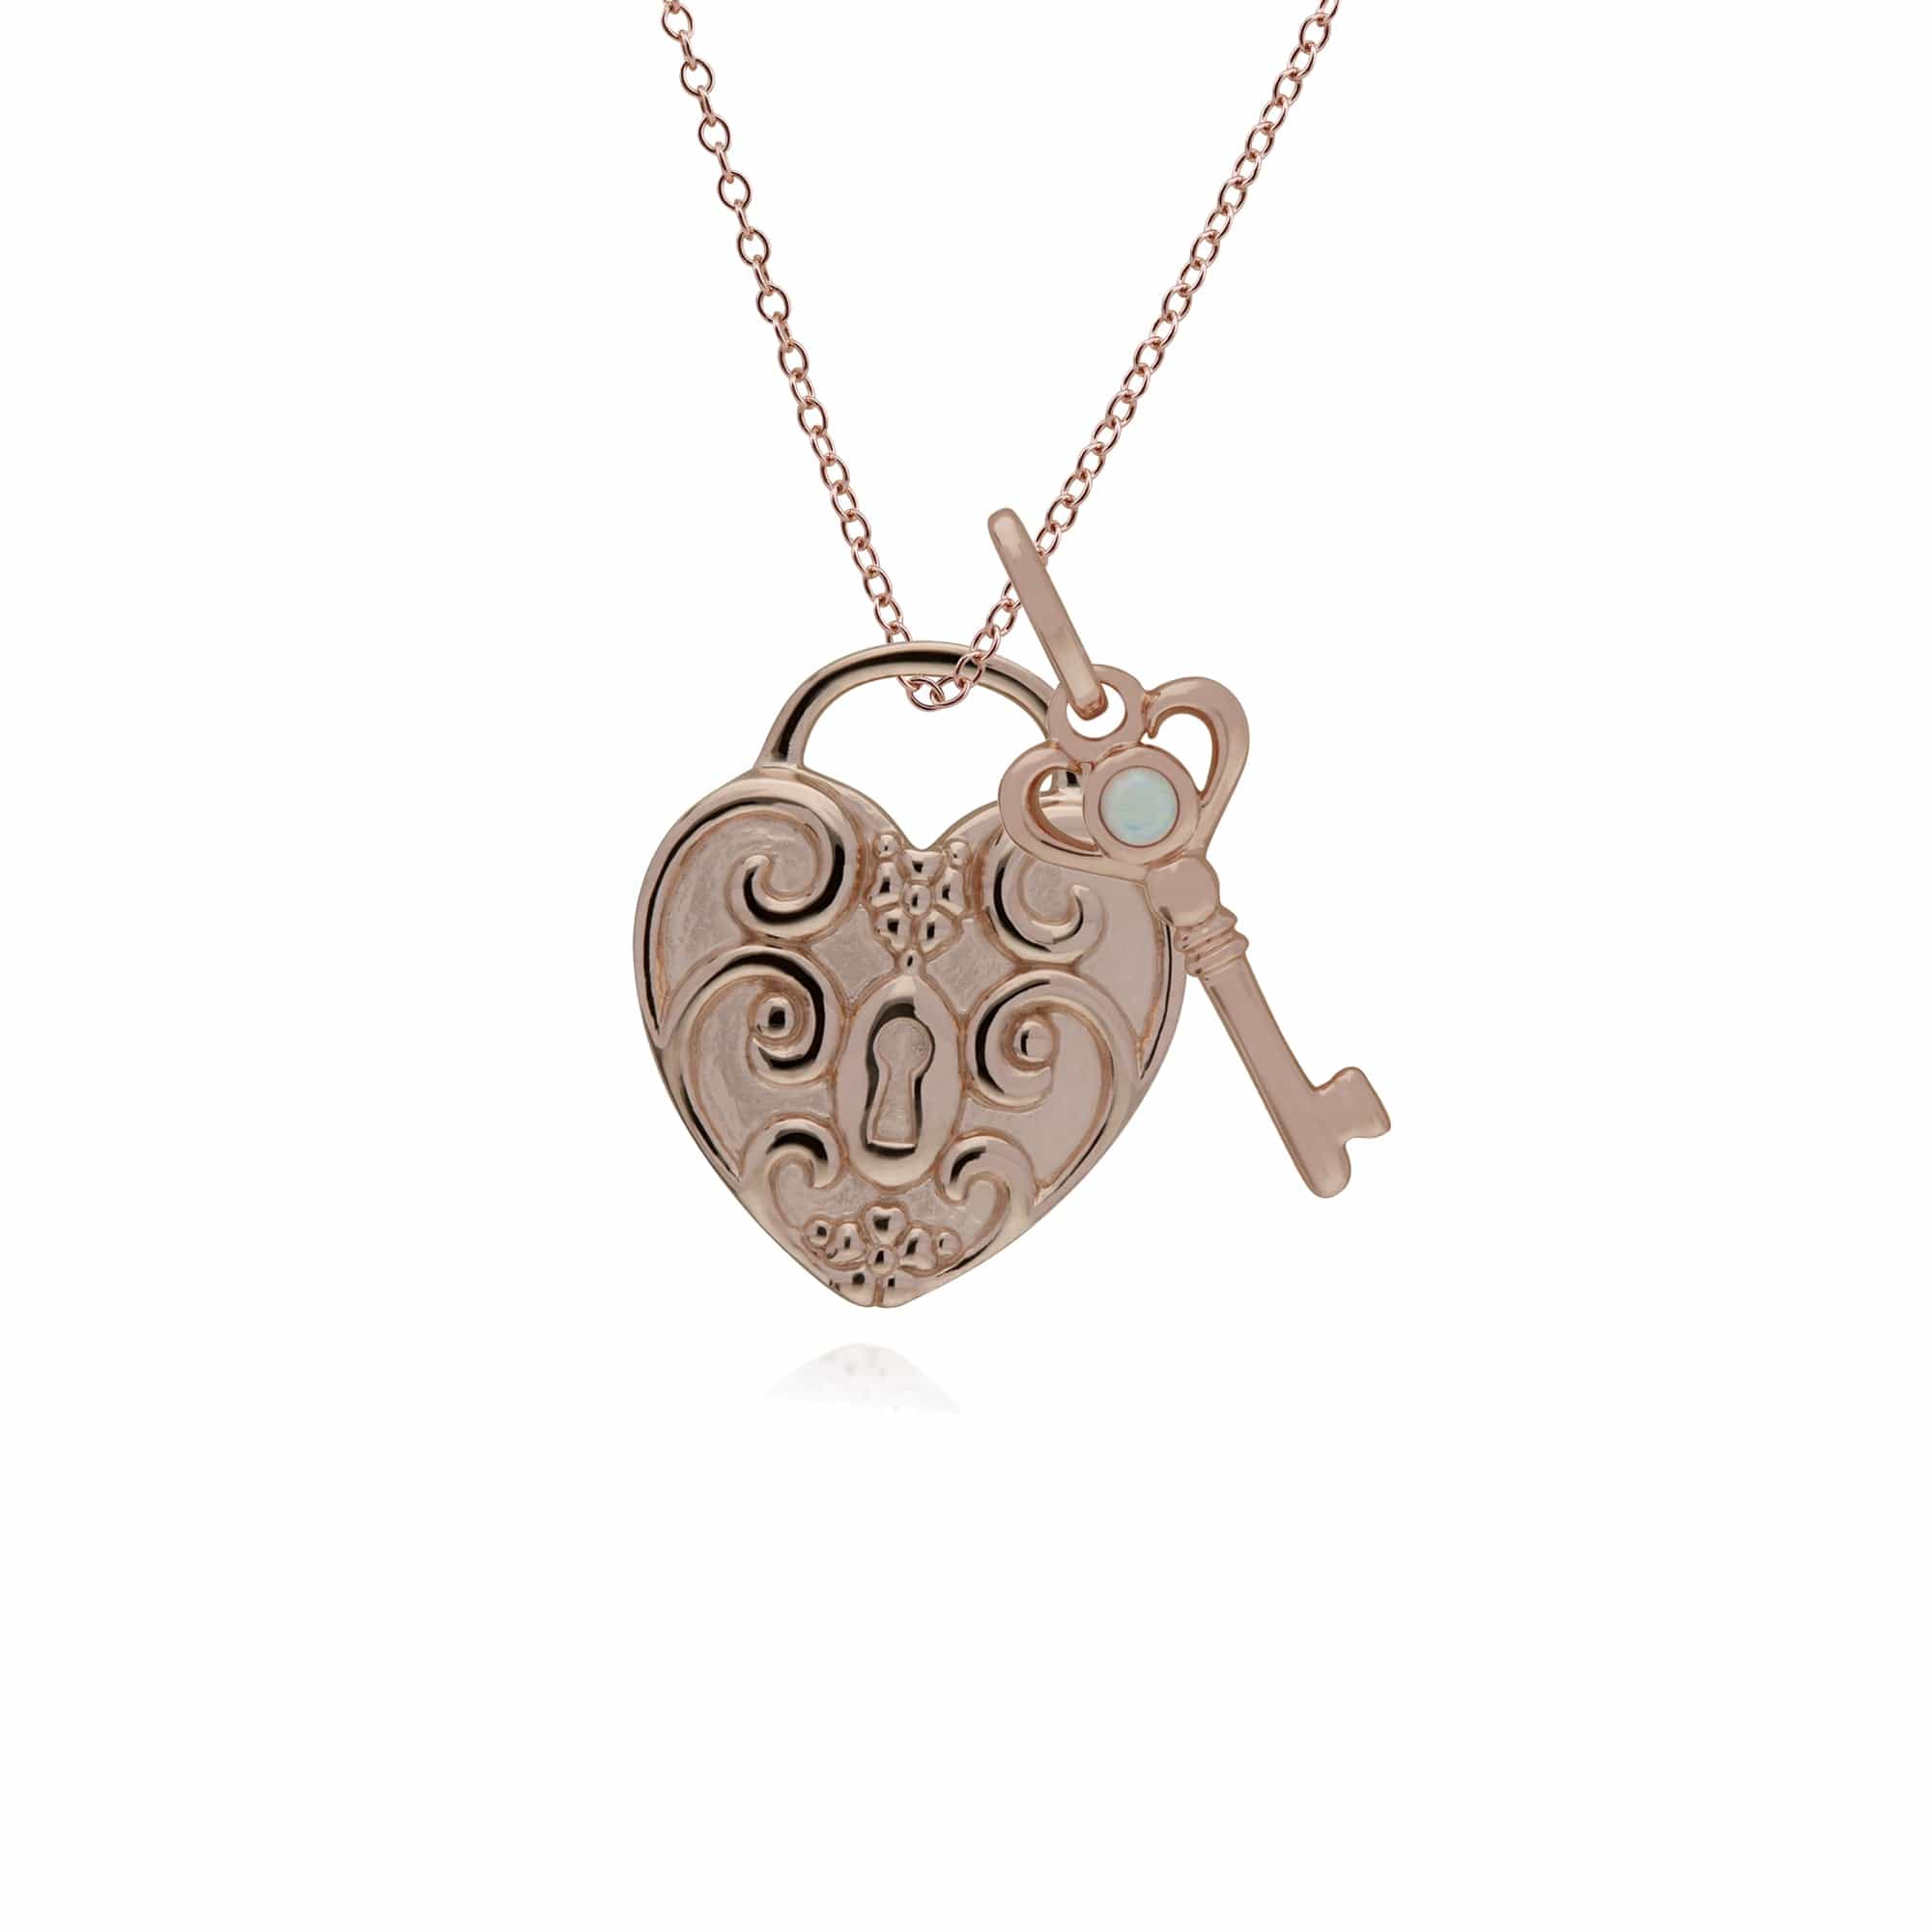 270P028602925-270P026501925 Classic Swirl Heart Lock Pendant & Opal Key Charm in Rose Gold Plated 925 Sterling Silver 1